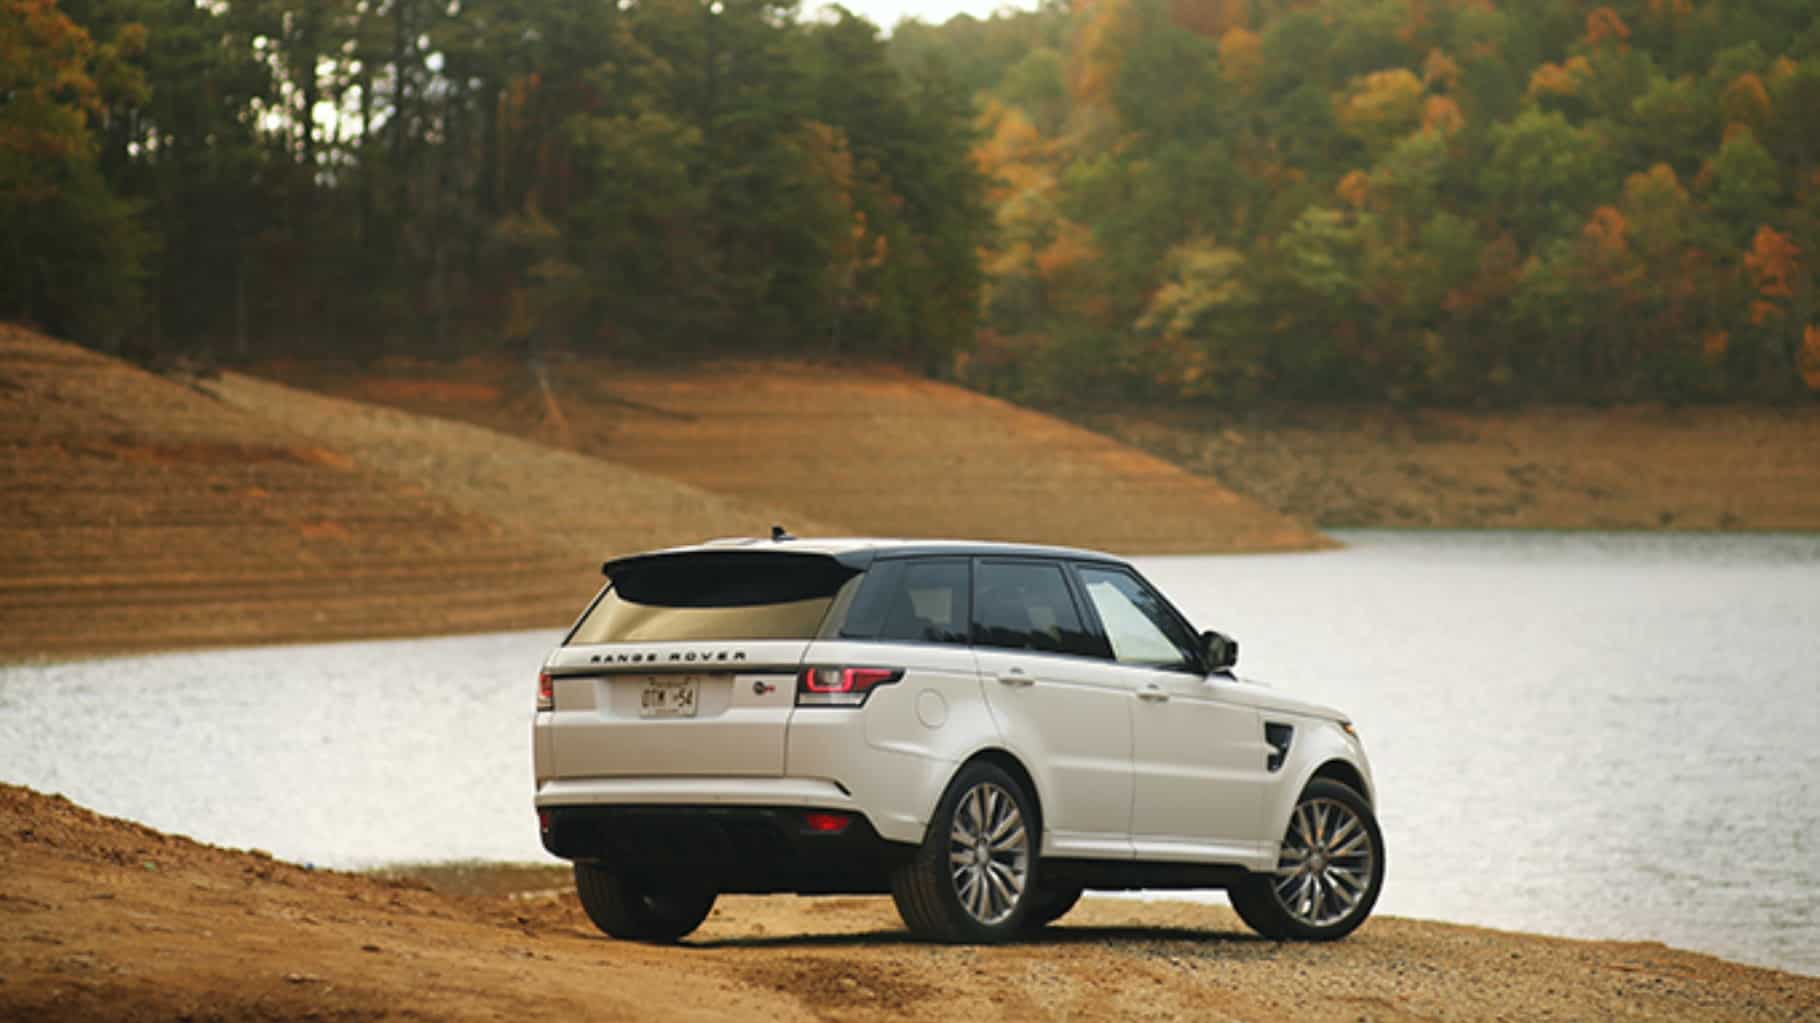  Range Rover Sport parked by a lake during fall rear side view.